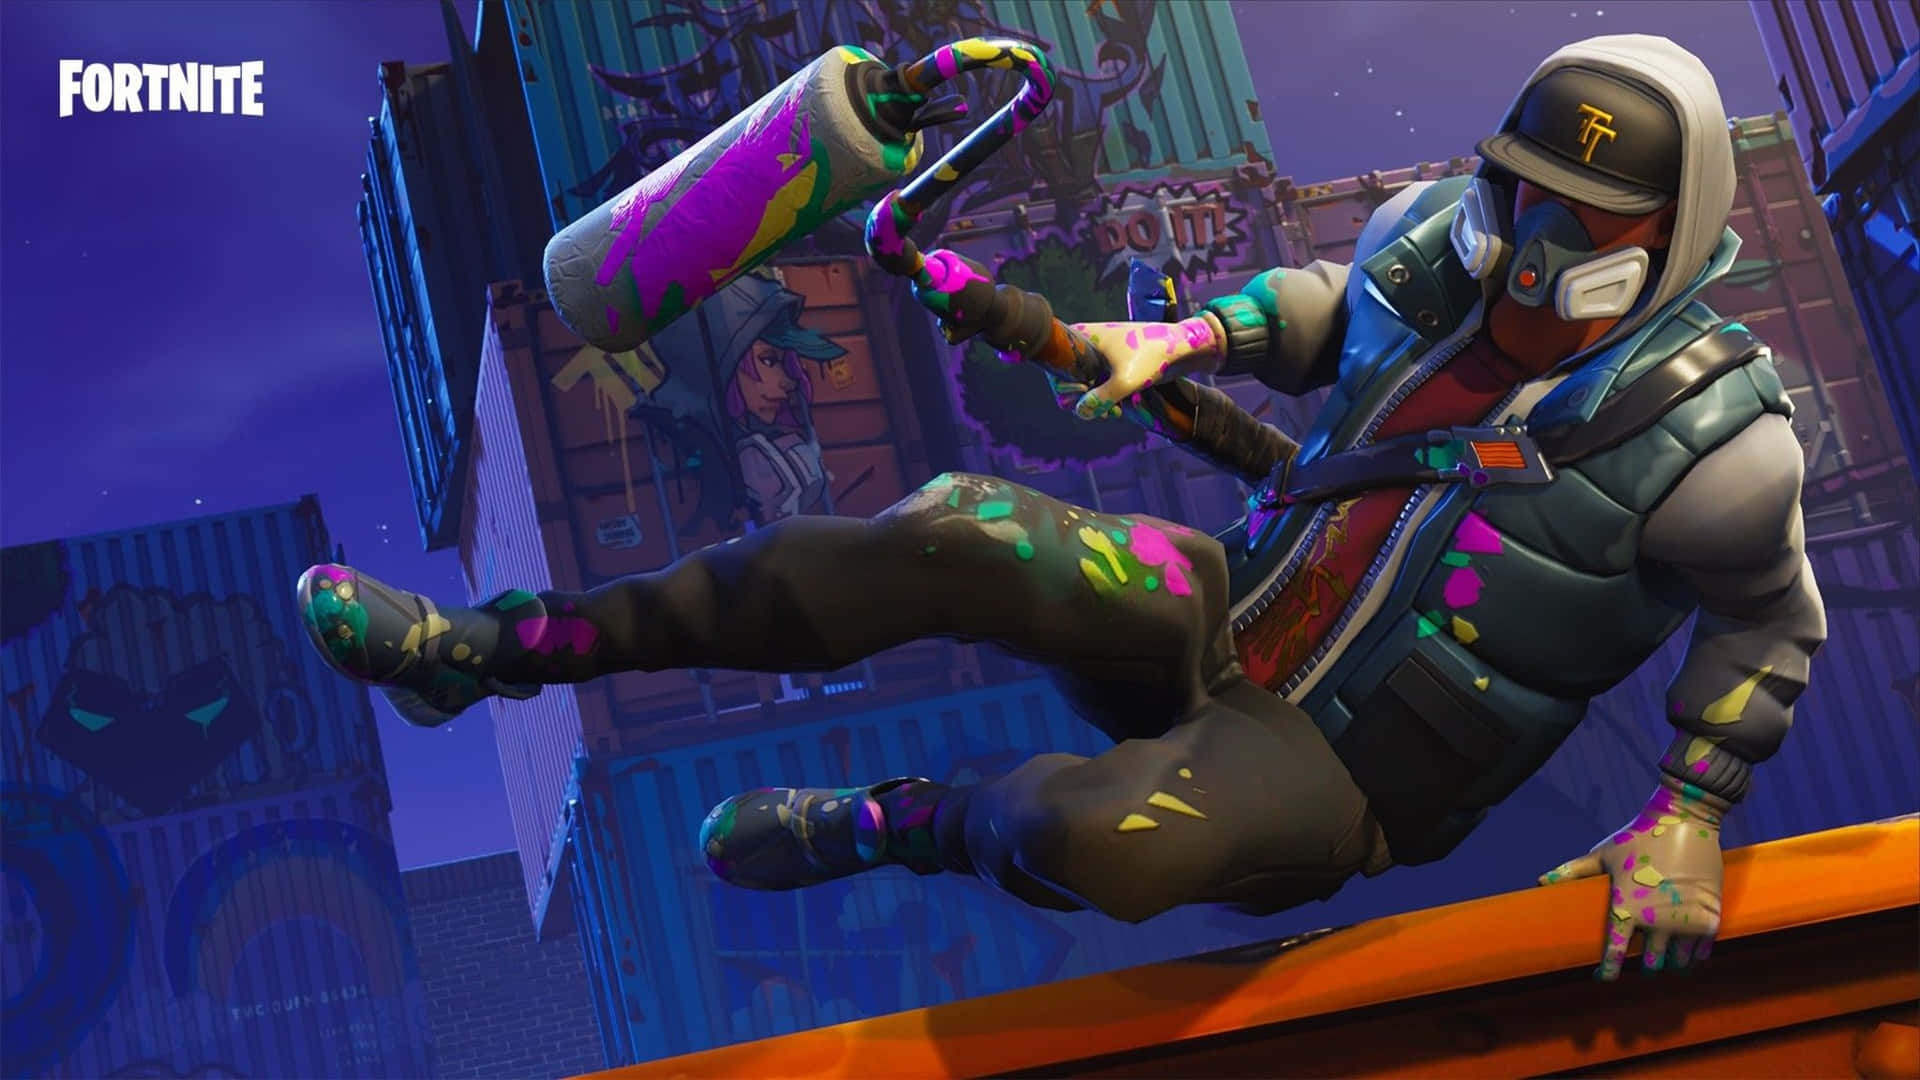 Get the most out of Fortnite with this premium laptop Wallpaper